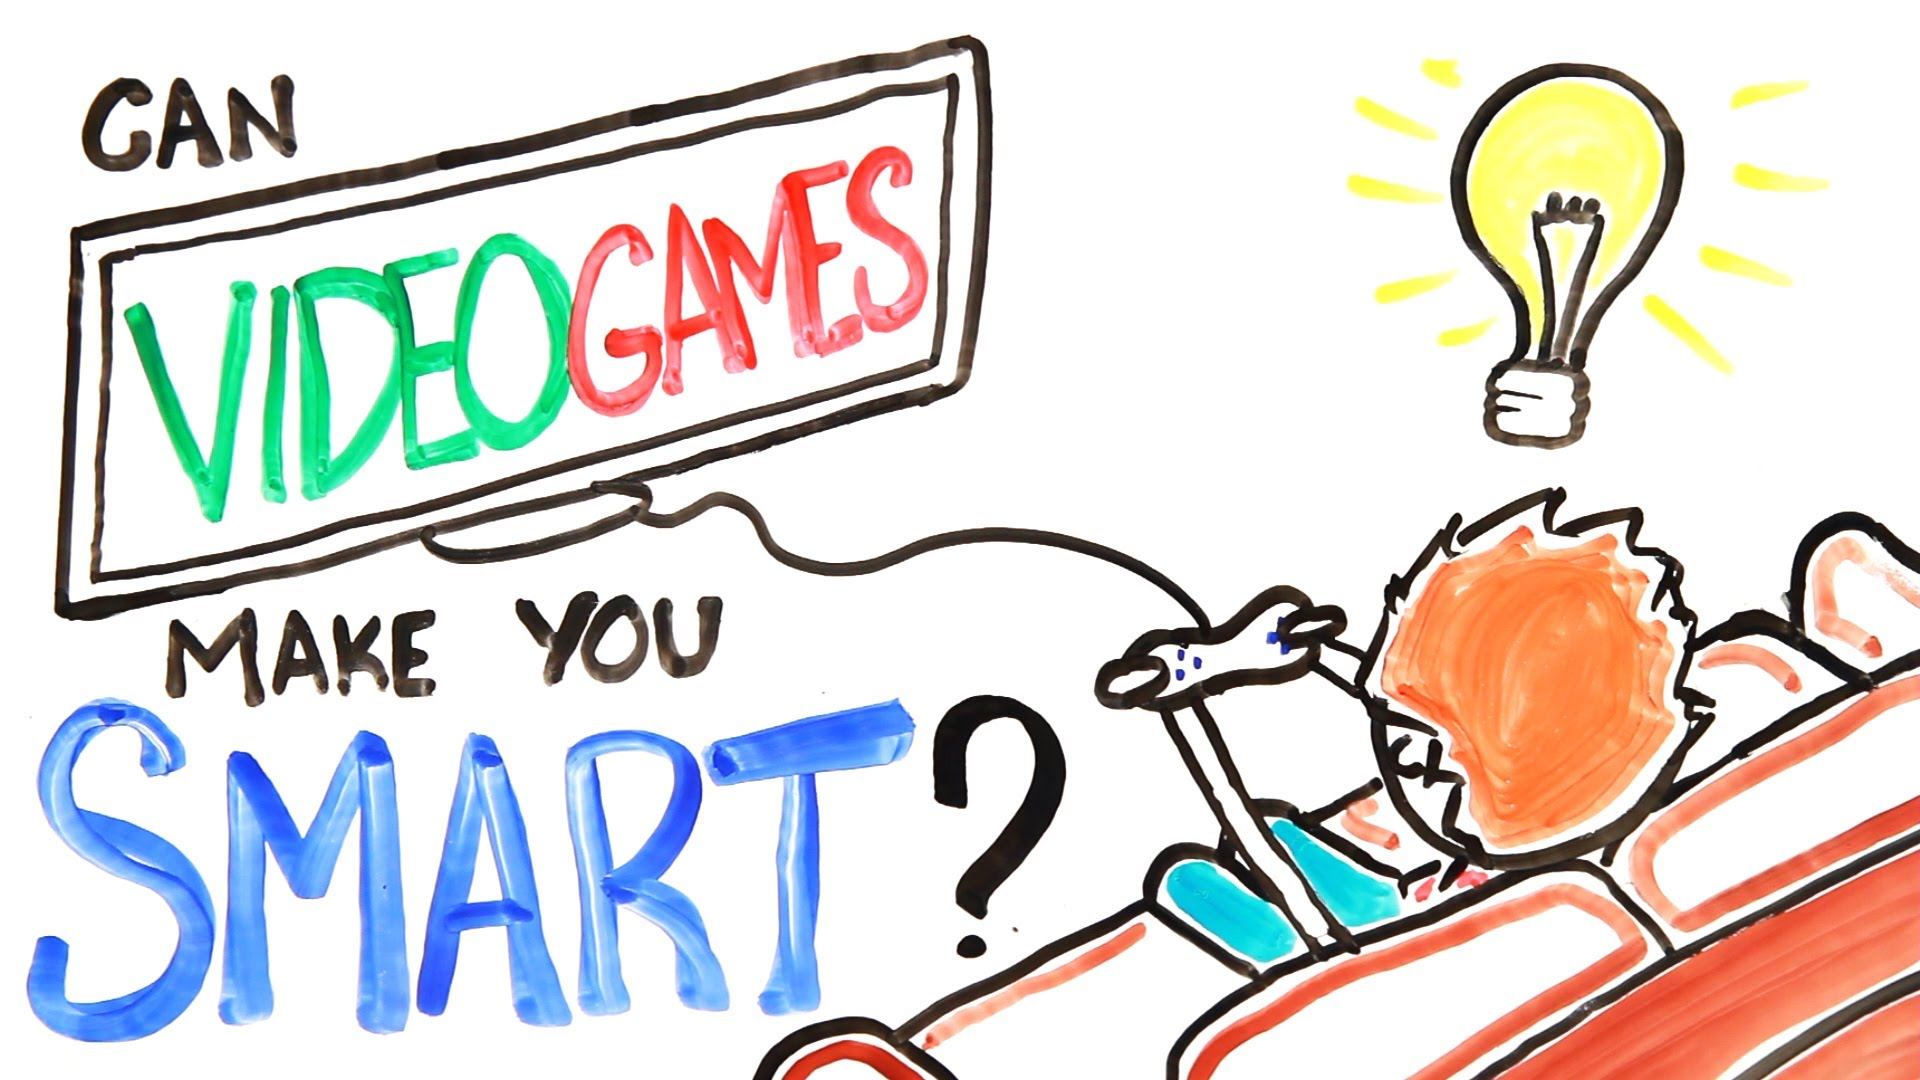 Science Has It: Video Games Can Make You Smarter